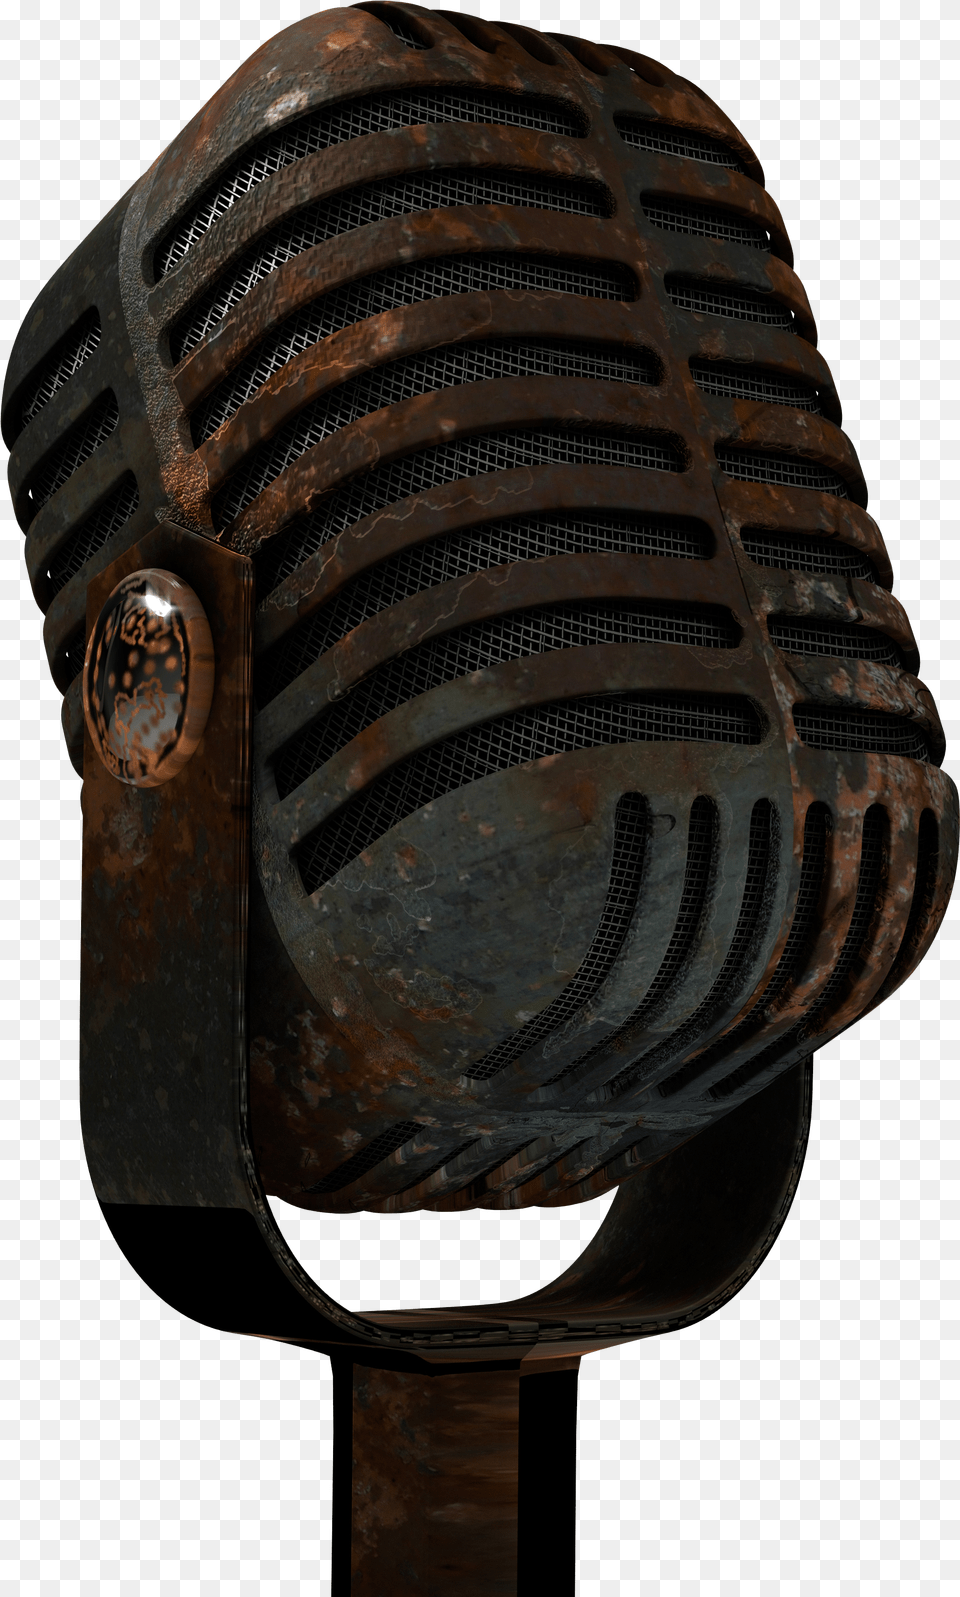 Rusty Microphone Free Transparent Png